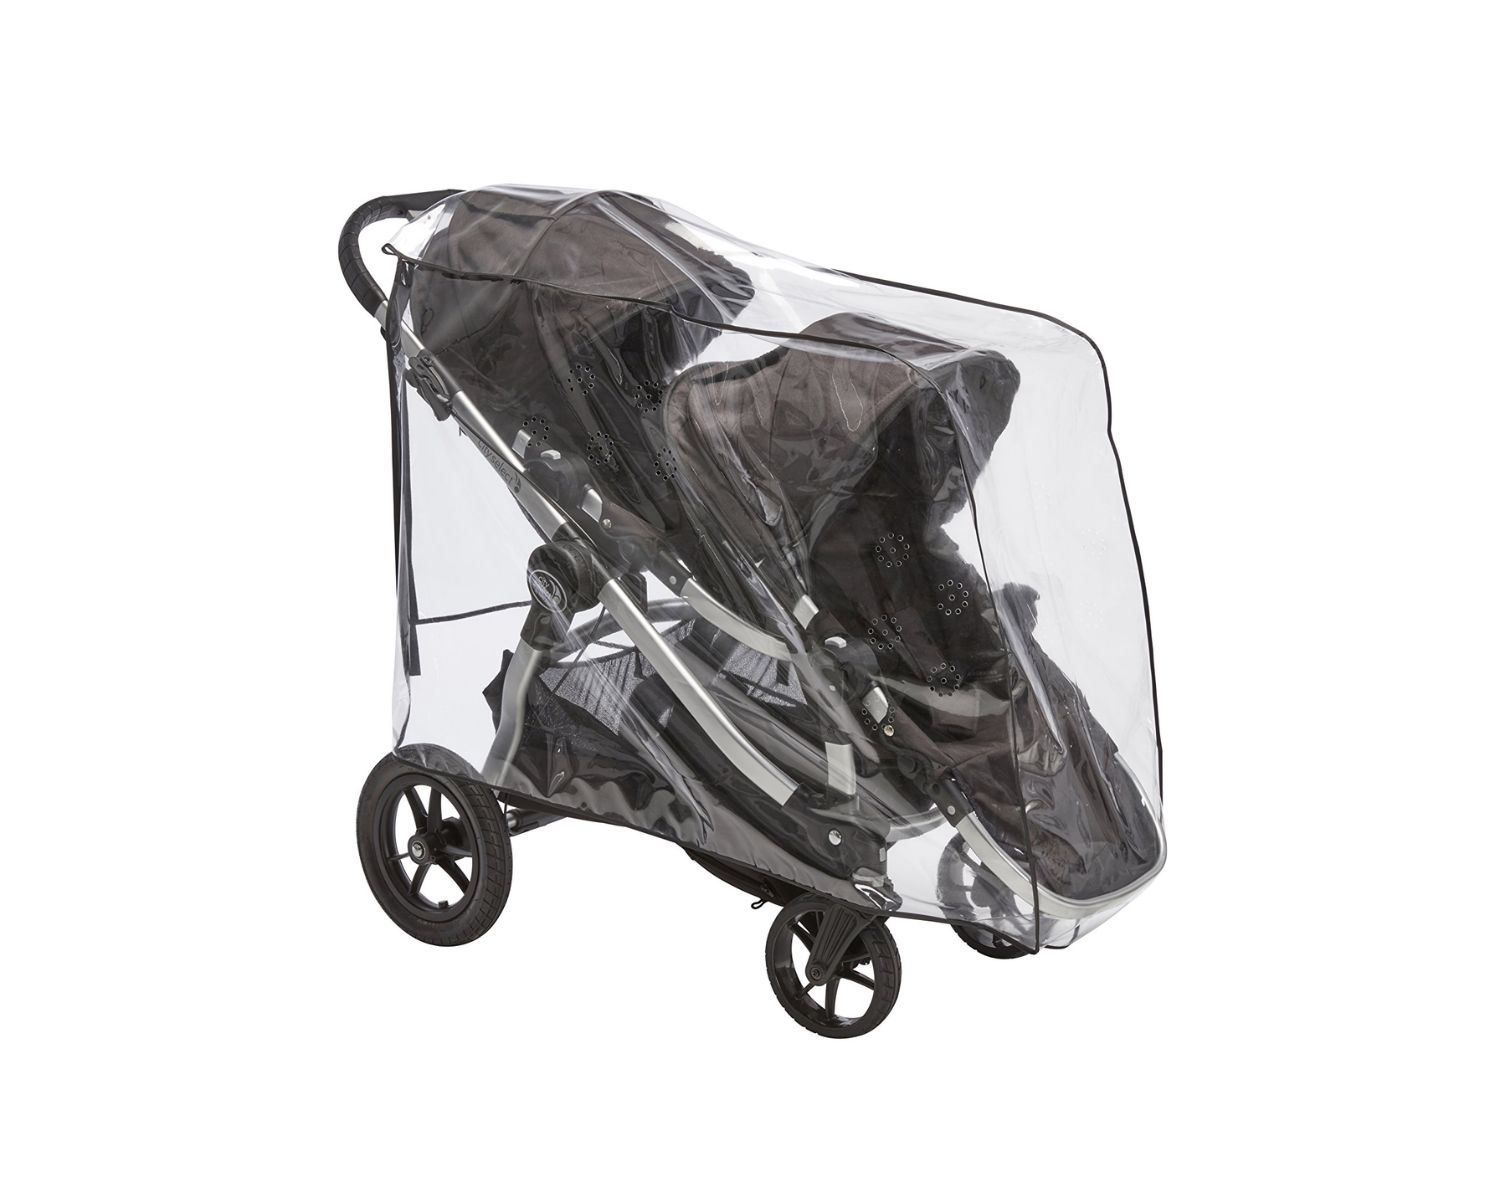 Review of Stroller Rain and Wind Covers